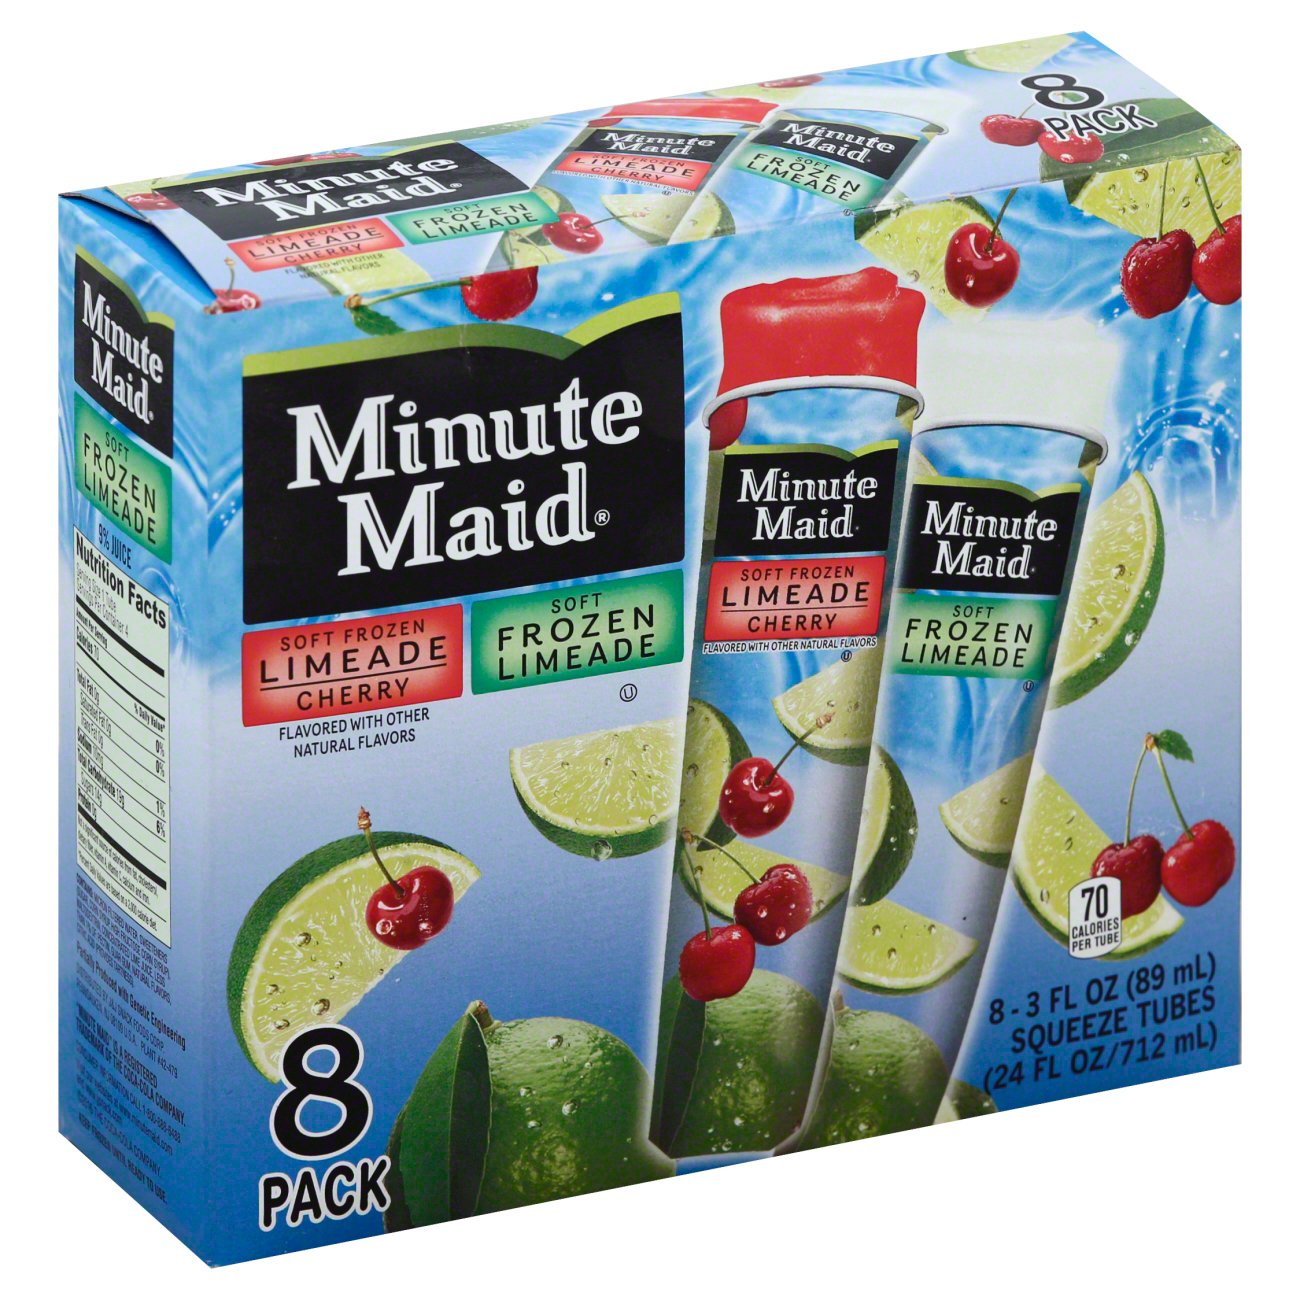 Minute Maid Cherry Limeade And Limeade Soft Frozen Squeeze Tubes Shop Bars And Pops At H E B 6355